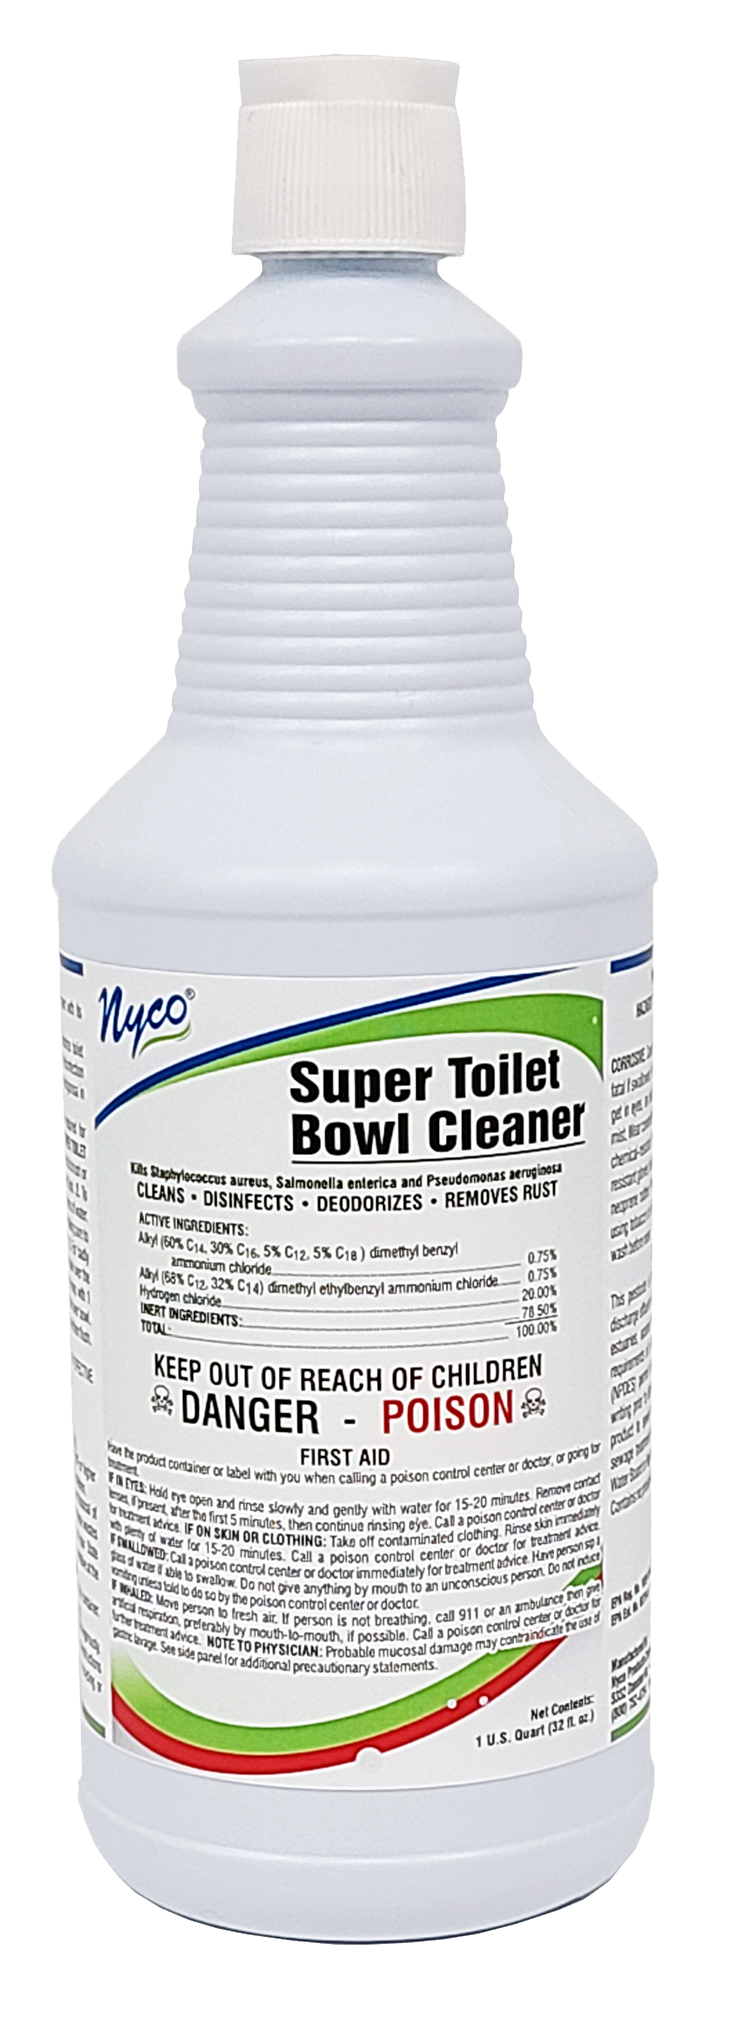 https://www.nycoproducts.com/wp-content/uploads/2021/08/NL025-Q12_Super-Toilet-Bowl-Cleaner.png